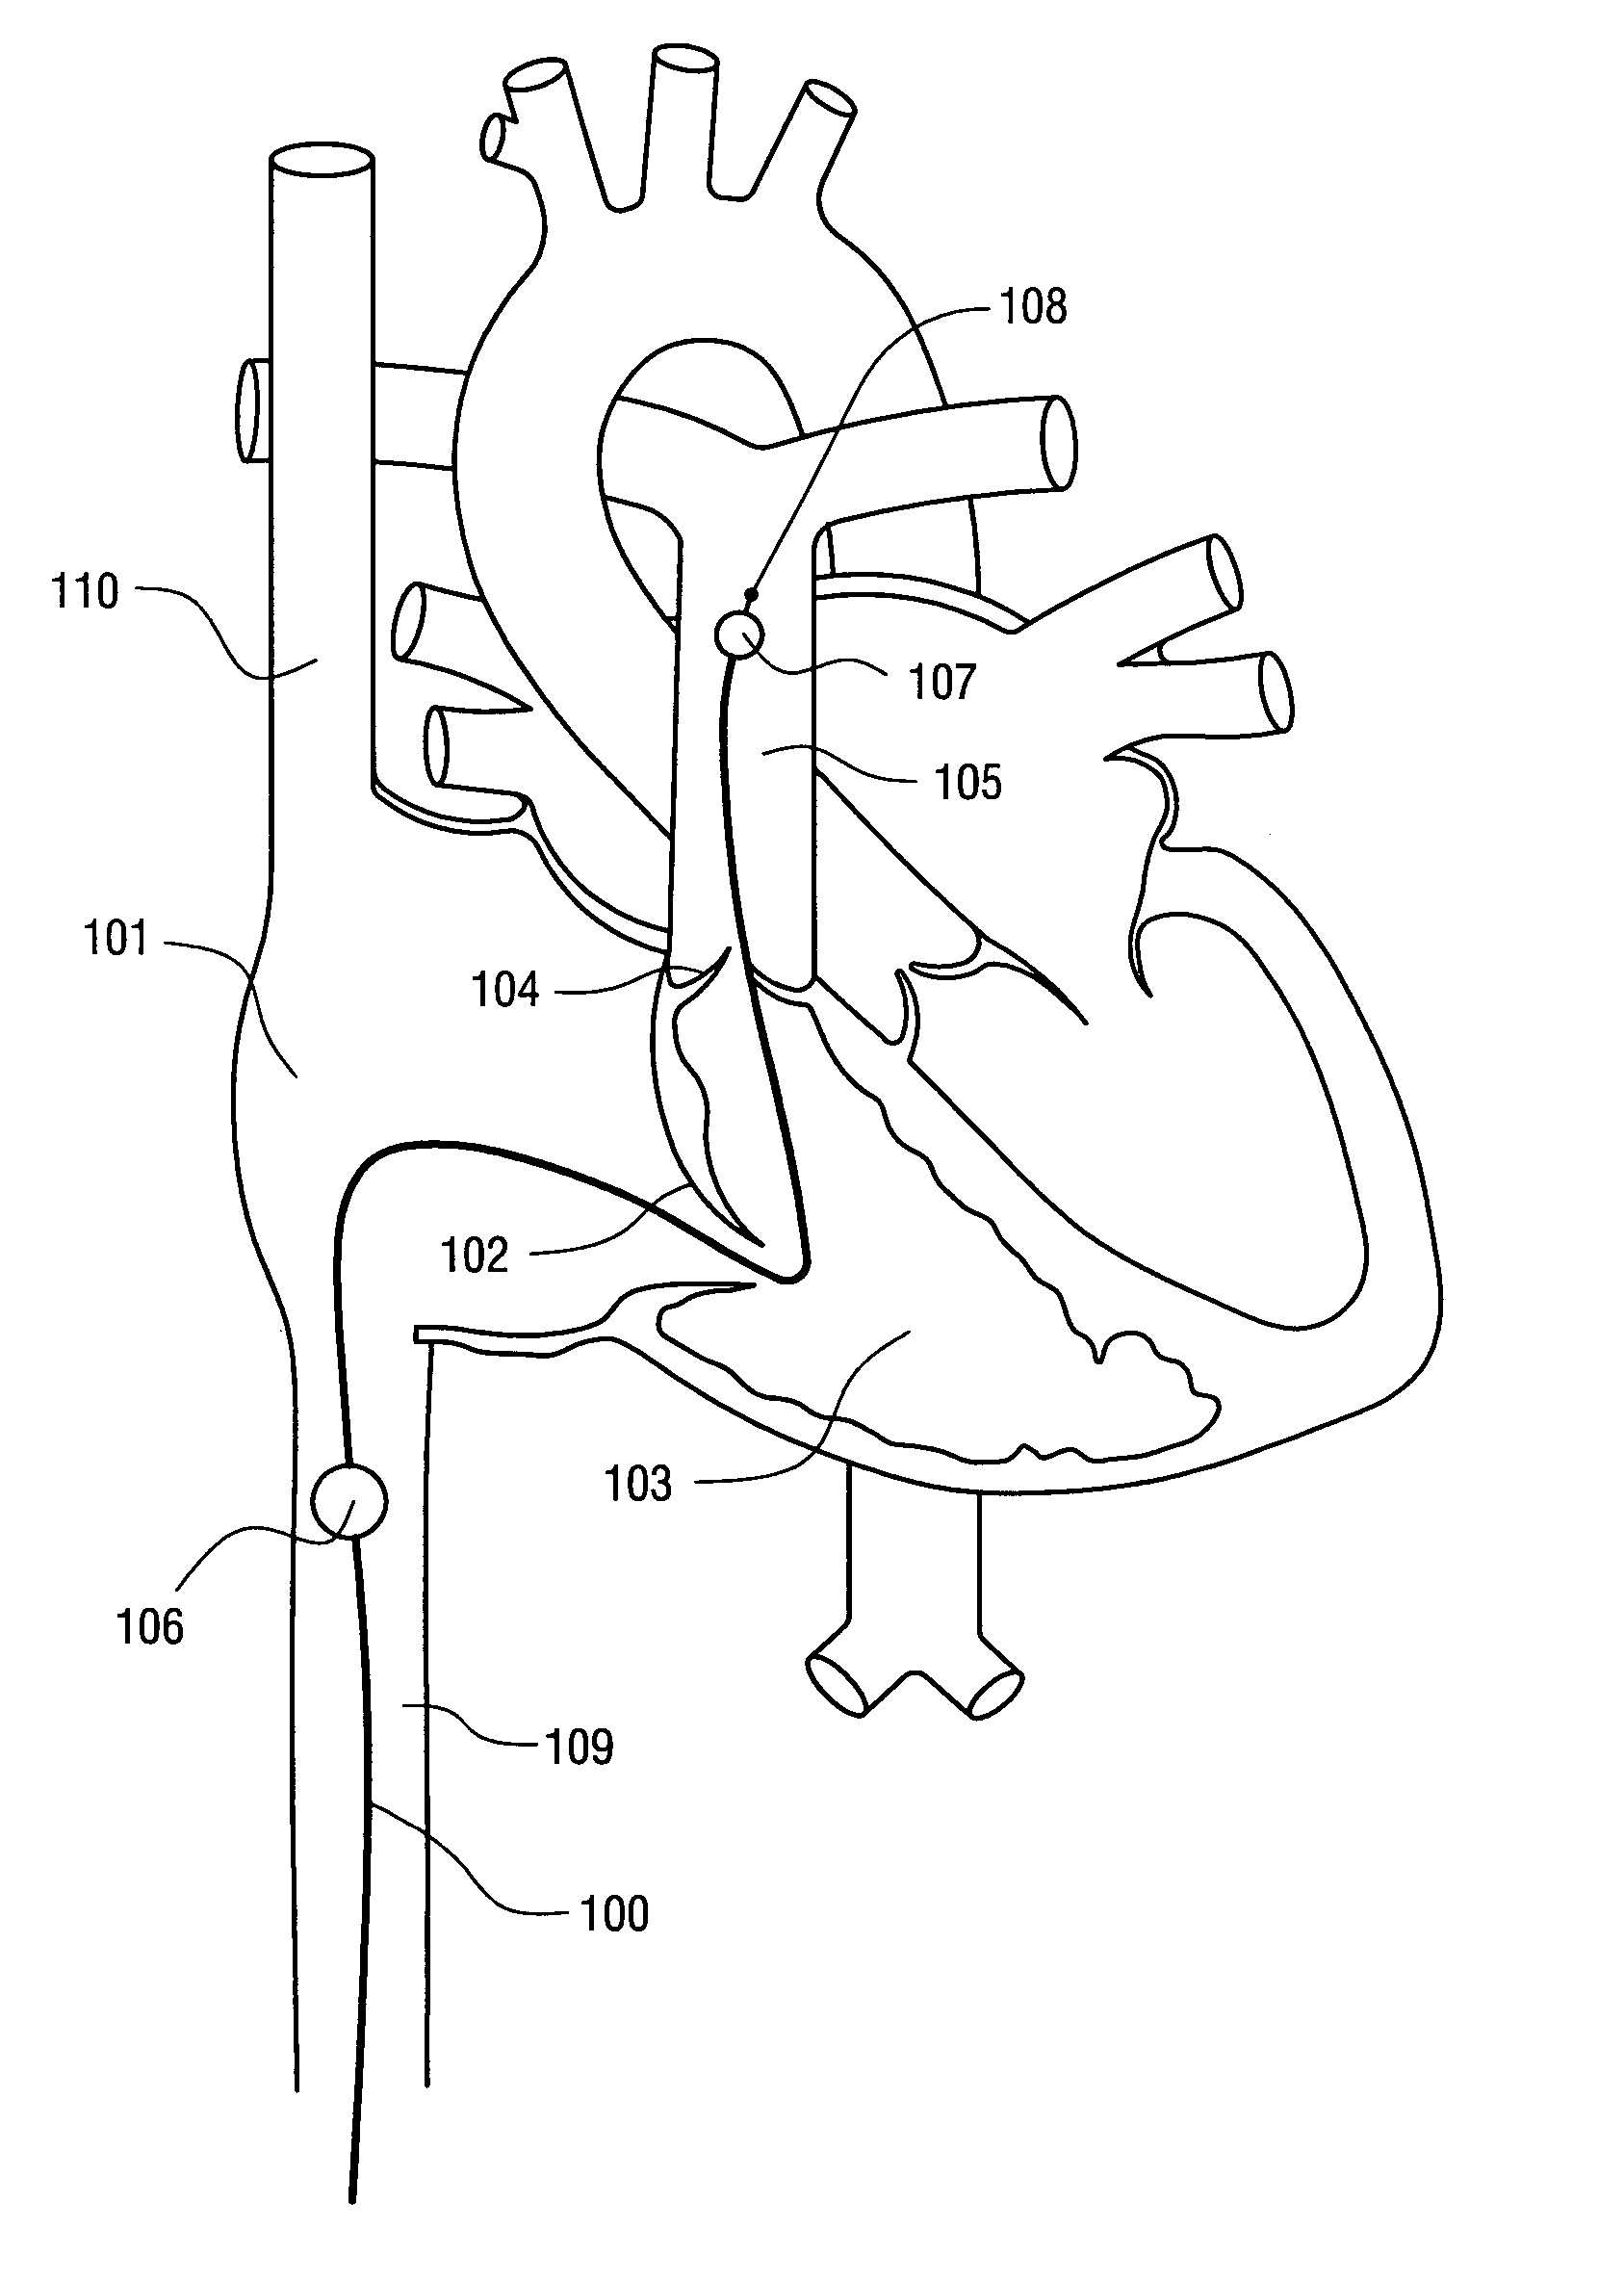 Treatment of infarct expansion by partially occluding vena cava